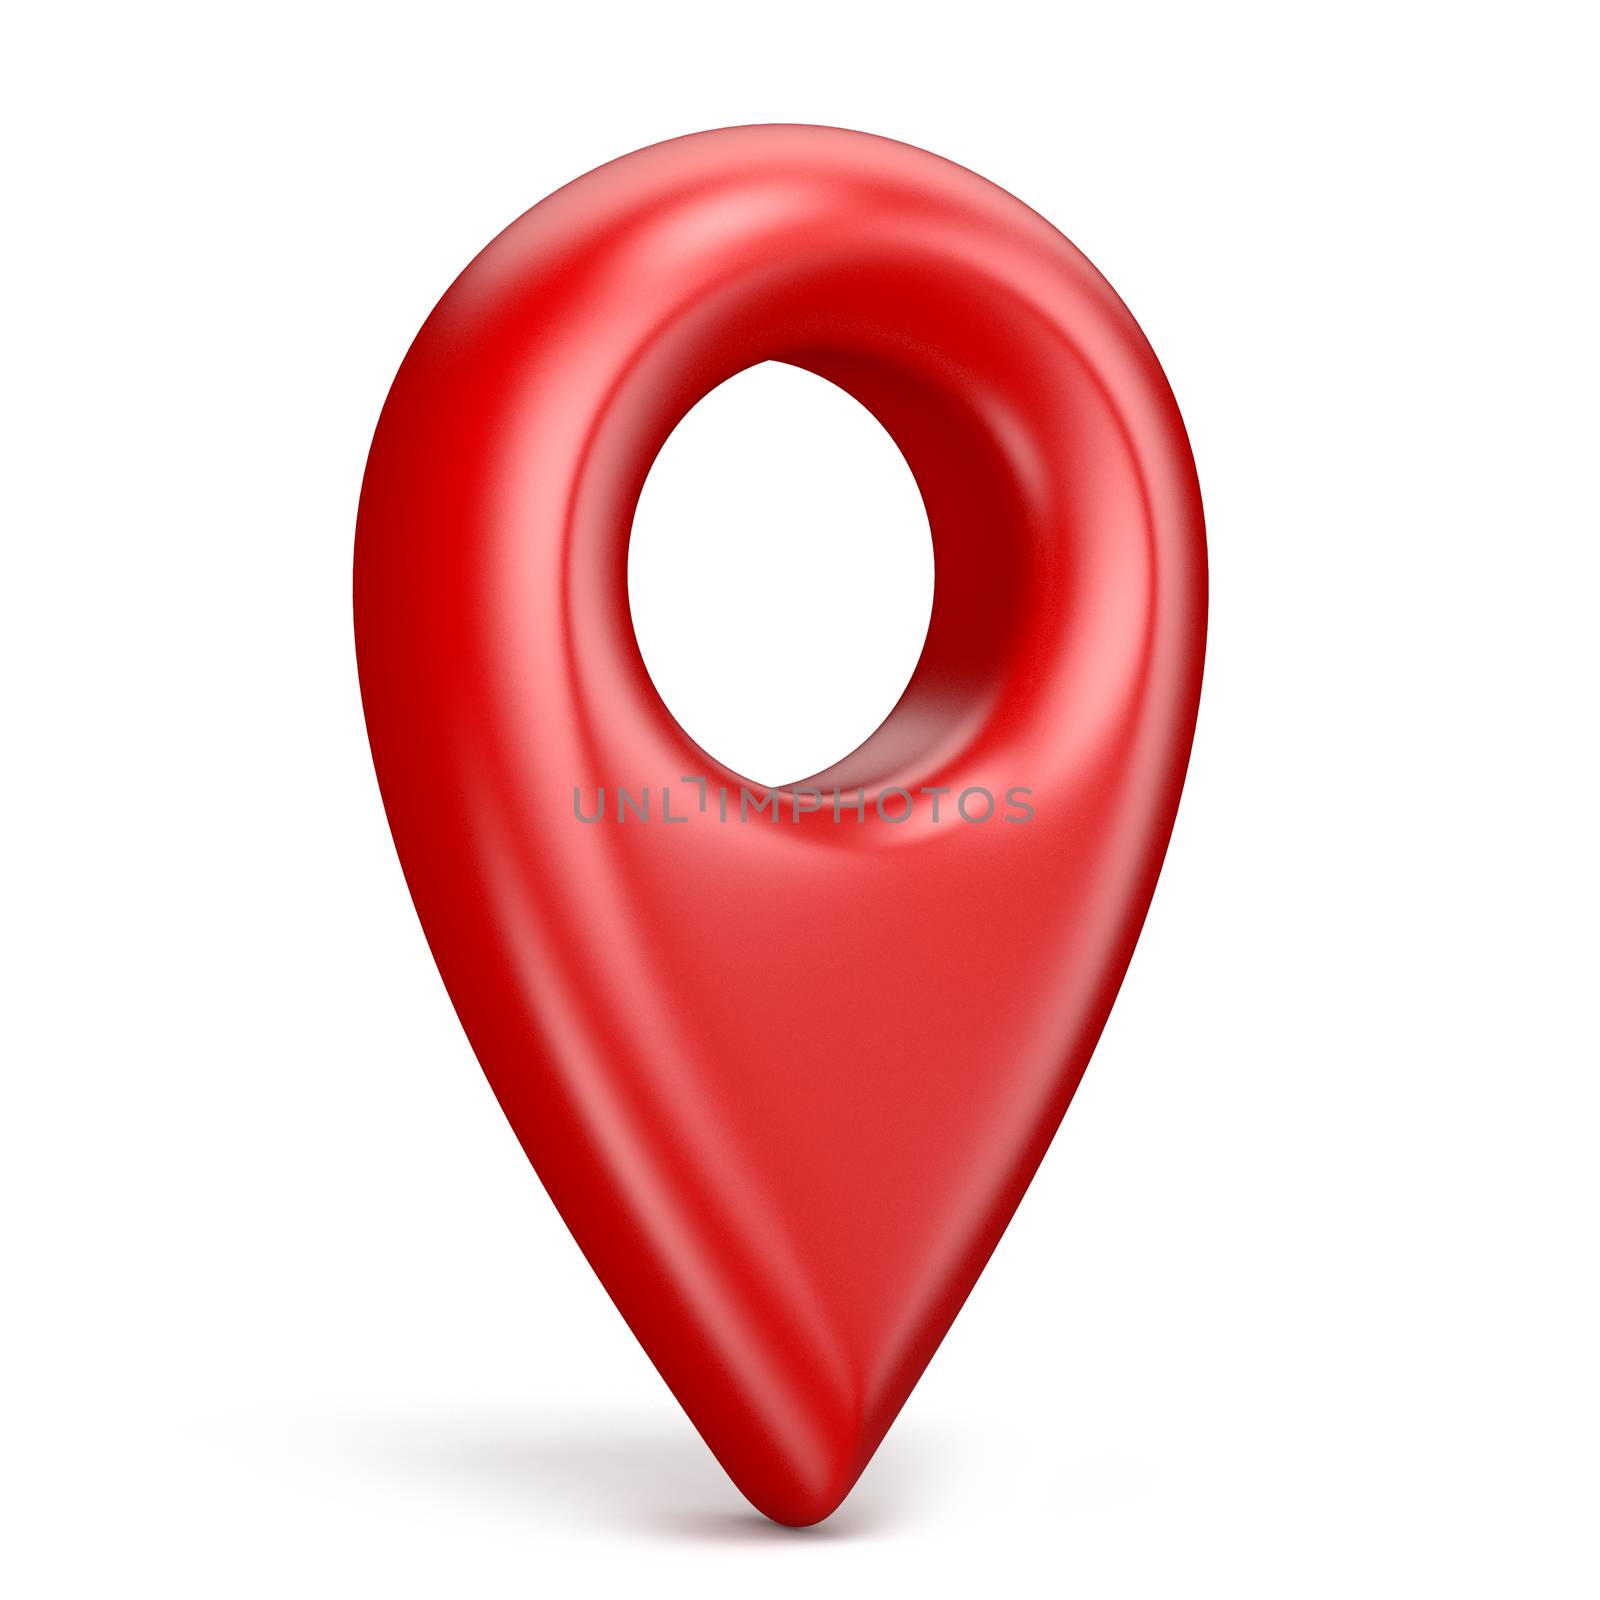 Red map pointer 3D render illustration isolated on white background